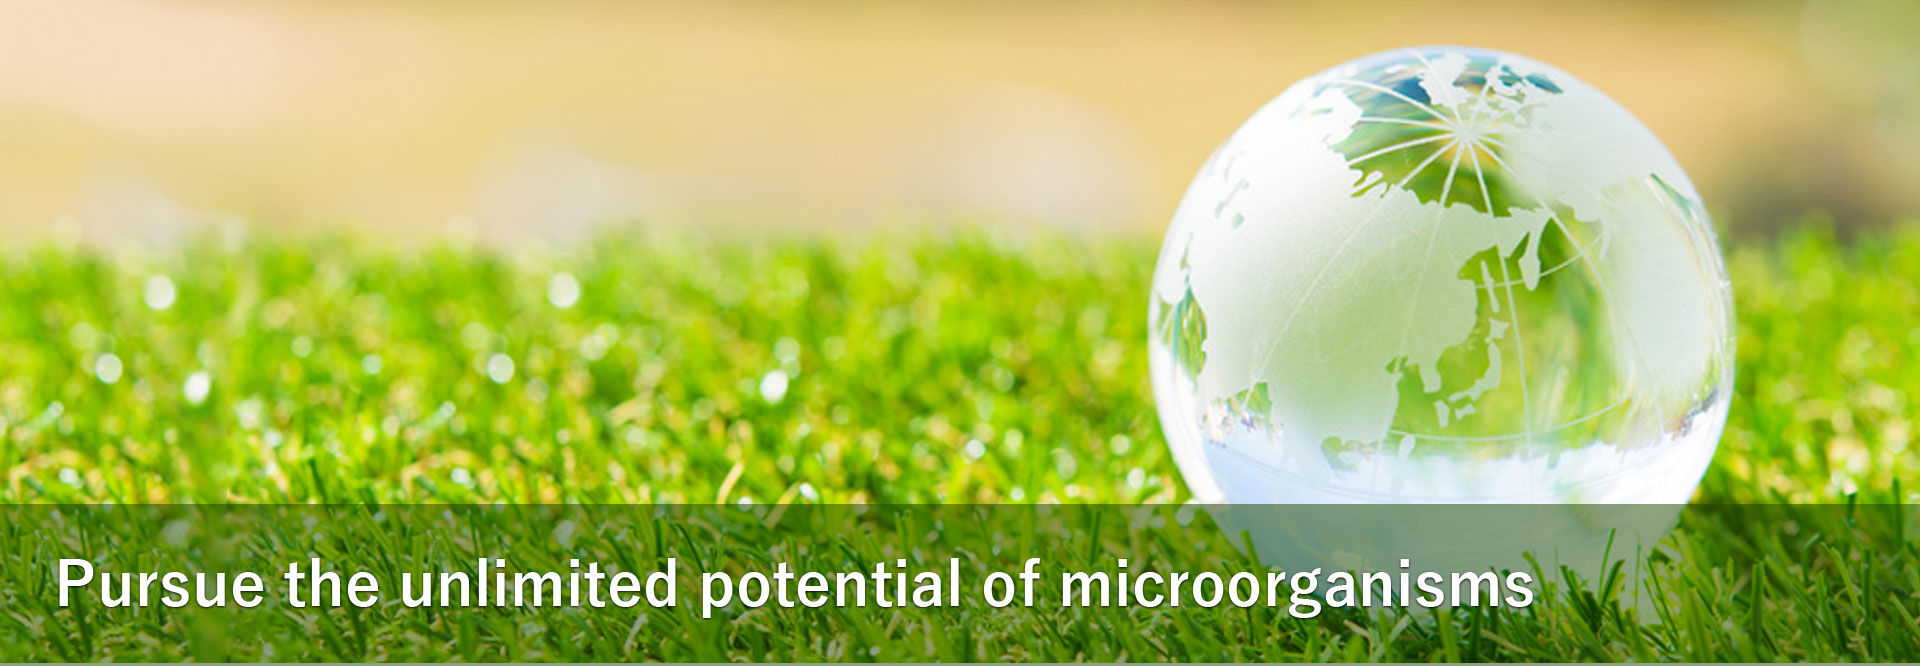 Pursue the unlimited potential of microorganisms